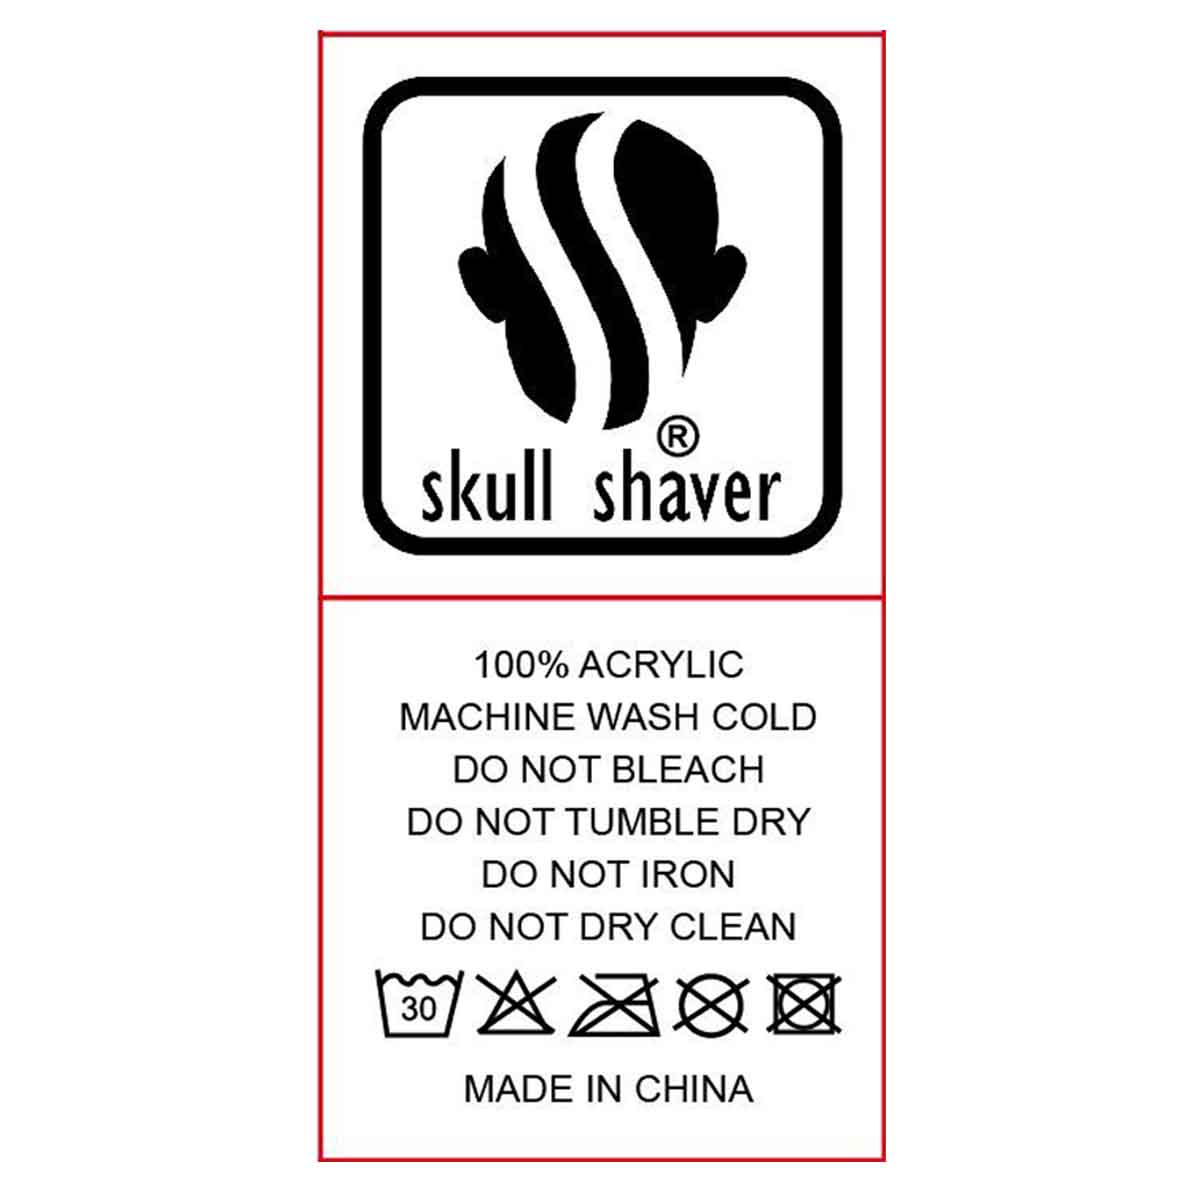 Skull Shaver Beanie Winter Hat is made with 100% Acrylic. Care instructions: machine wash cold, do not bleach, do not tumble dry, do not iron, do not dry clean. made in china